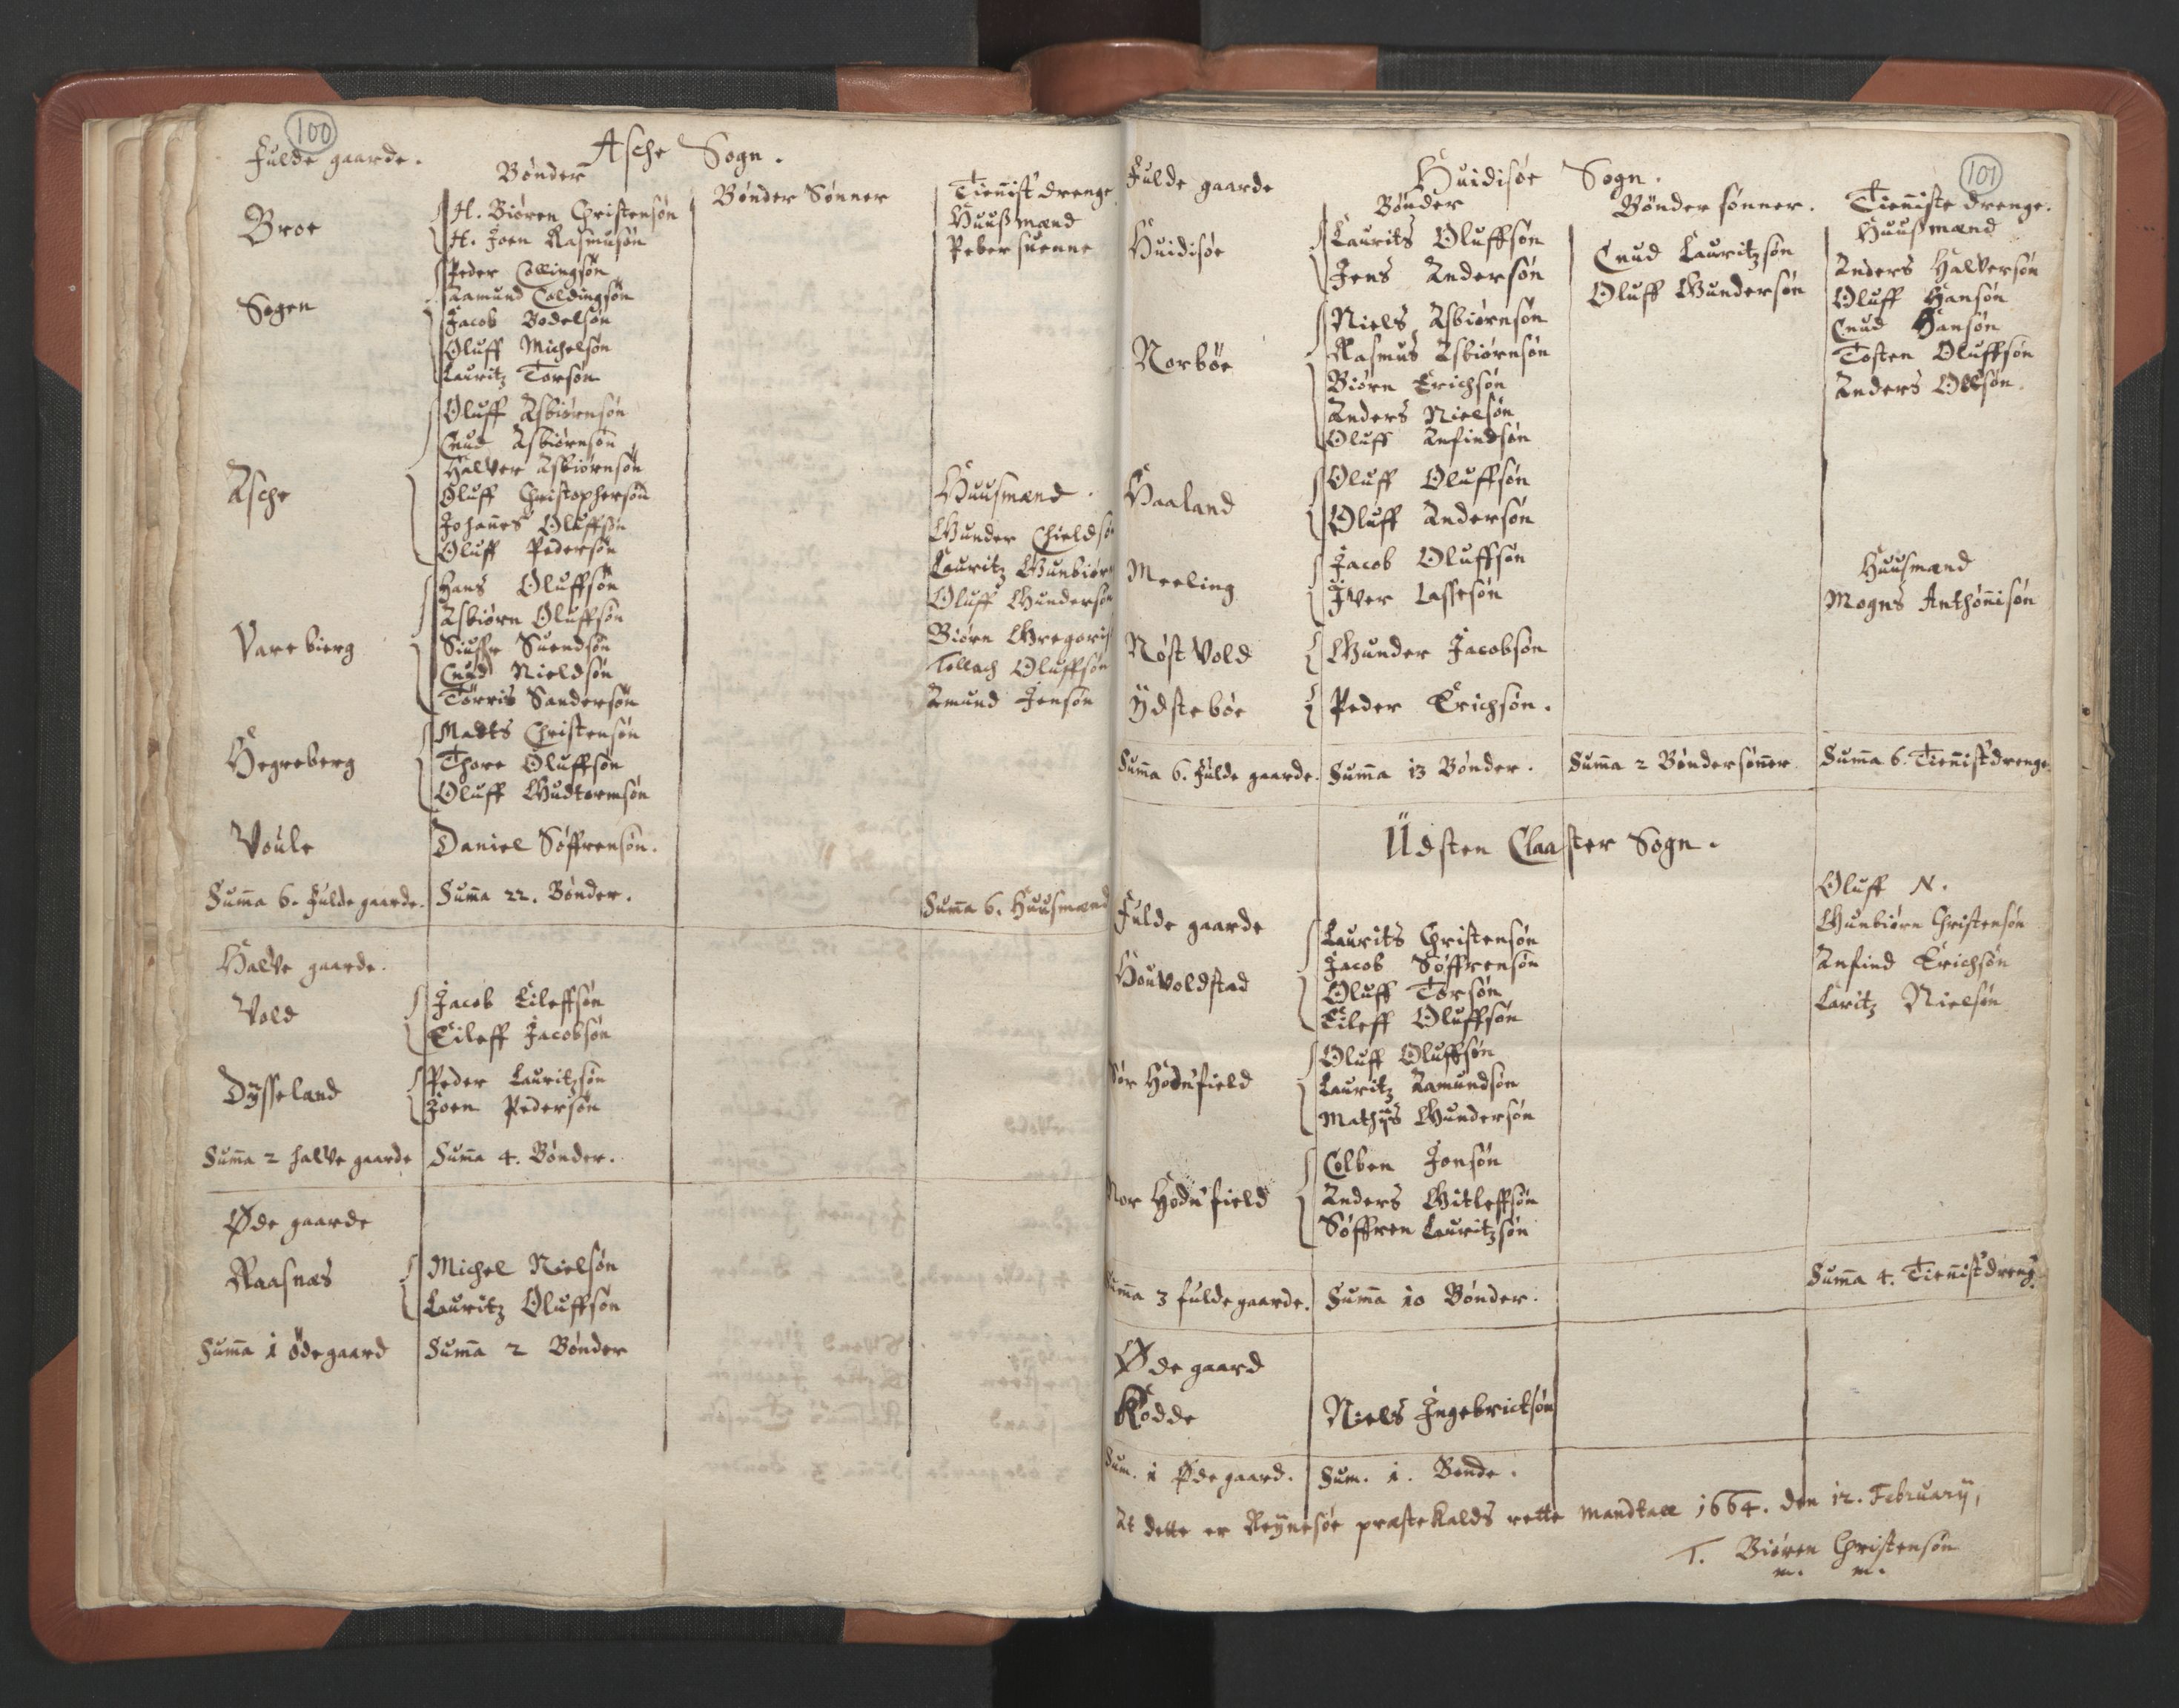 RA, Vicar's Census 1664-1666, no. 18: Stavanger deanery and Karmsund deanery, 1664-1666, p. 100-101